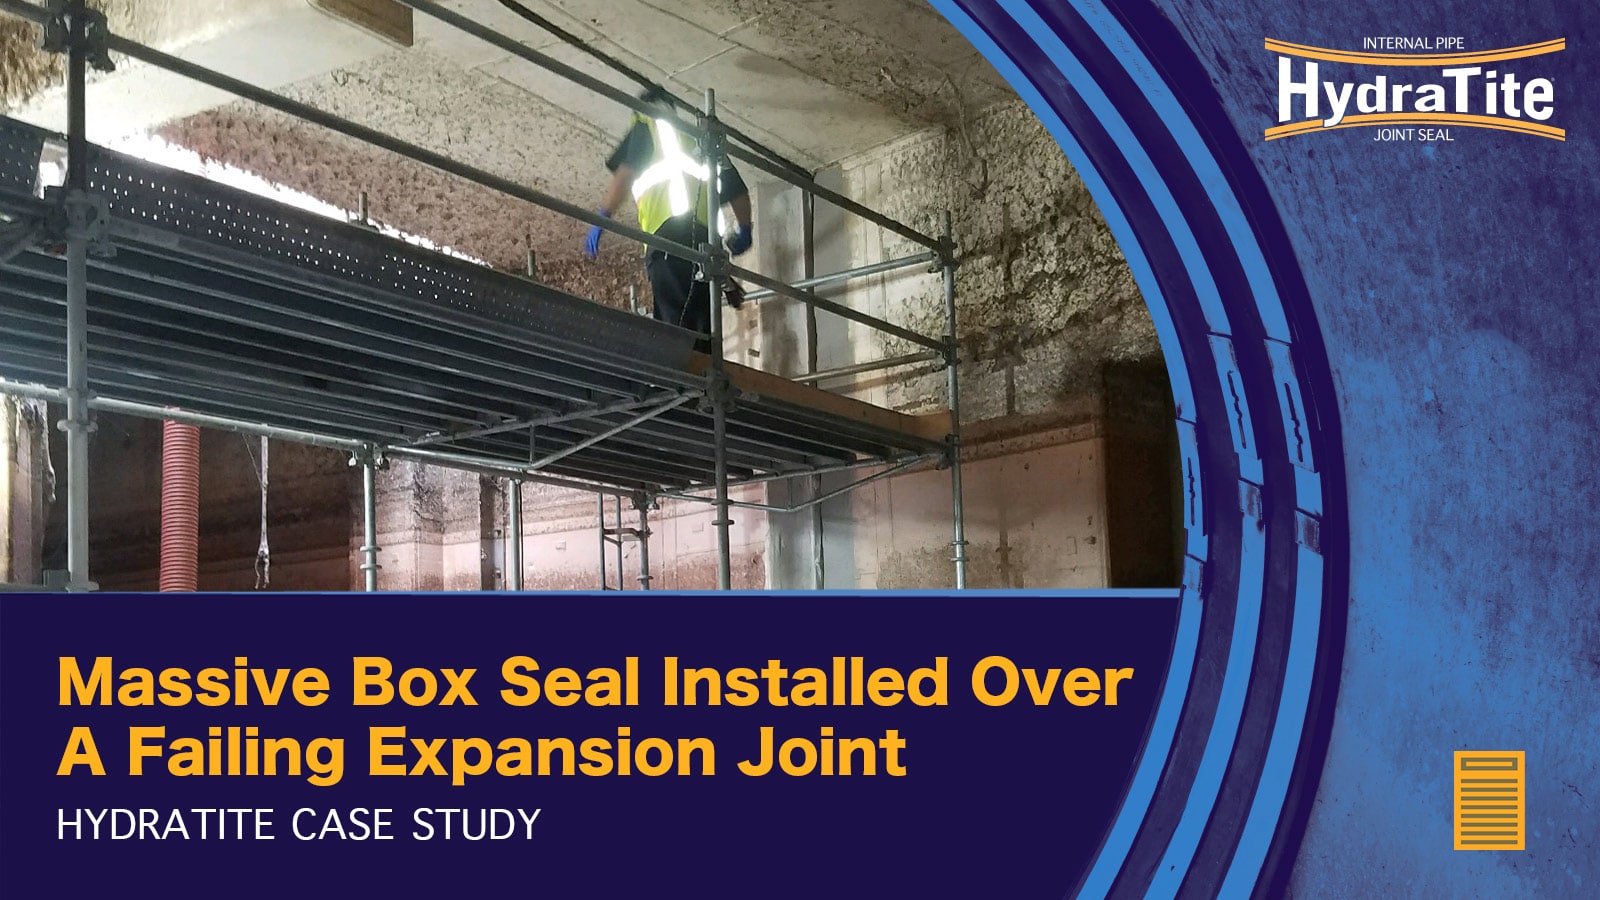 large expansion joint being repaired by a crew using scaffolding, 'Massive Box Seal Installed Over A Failing Expansion Joint'